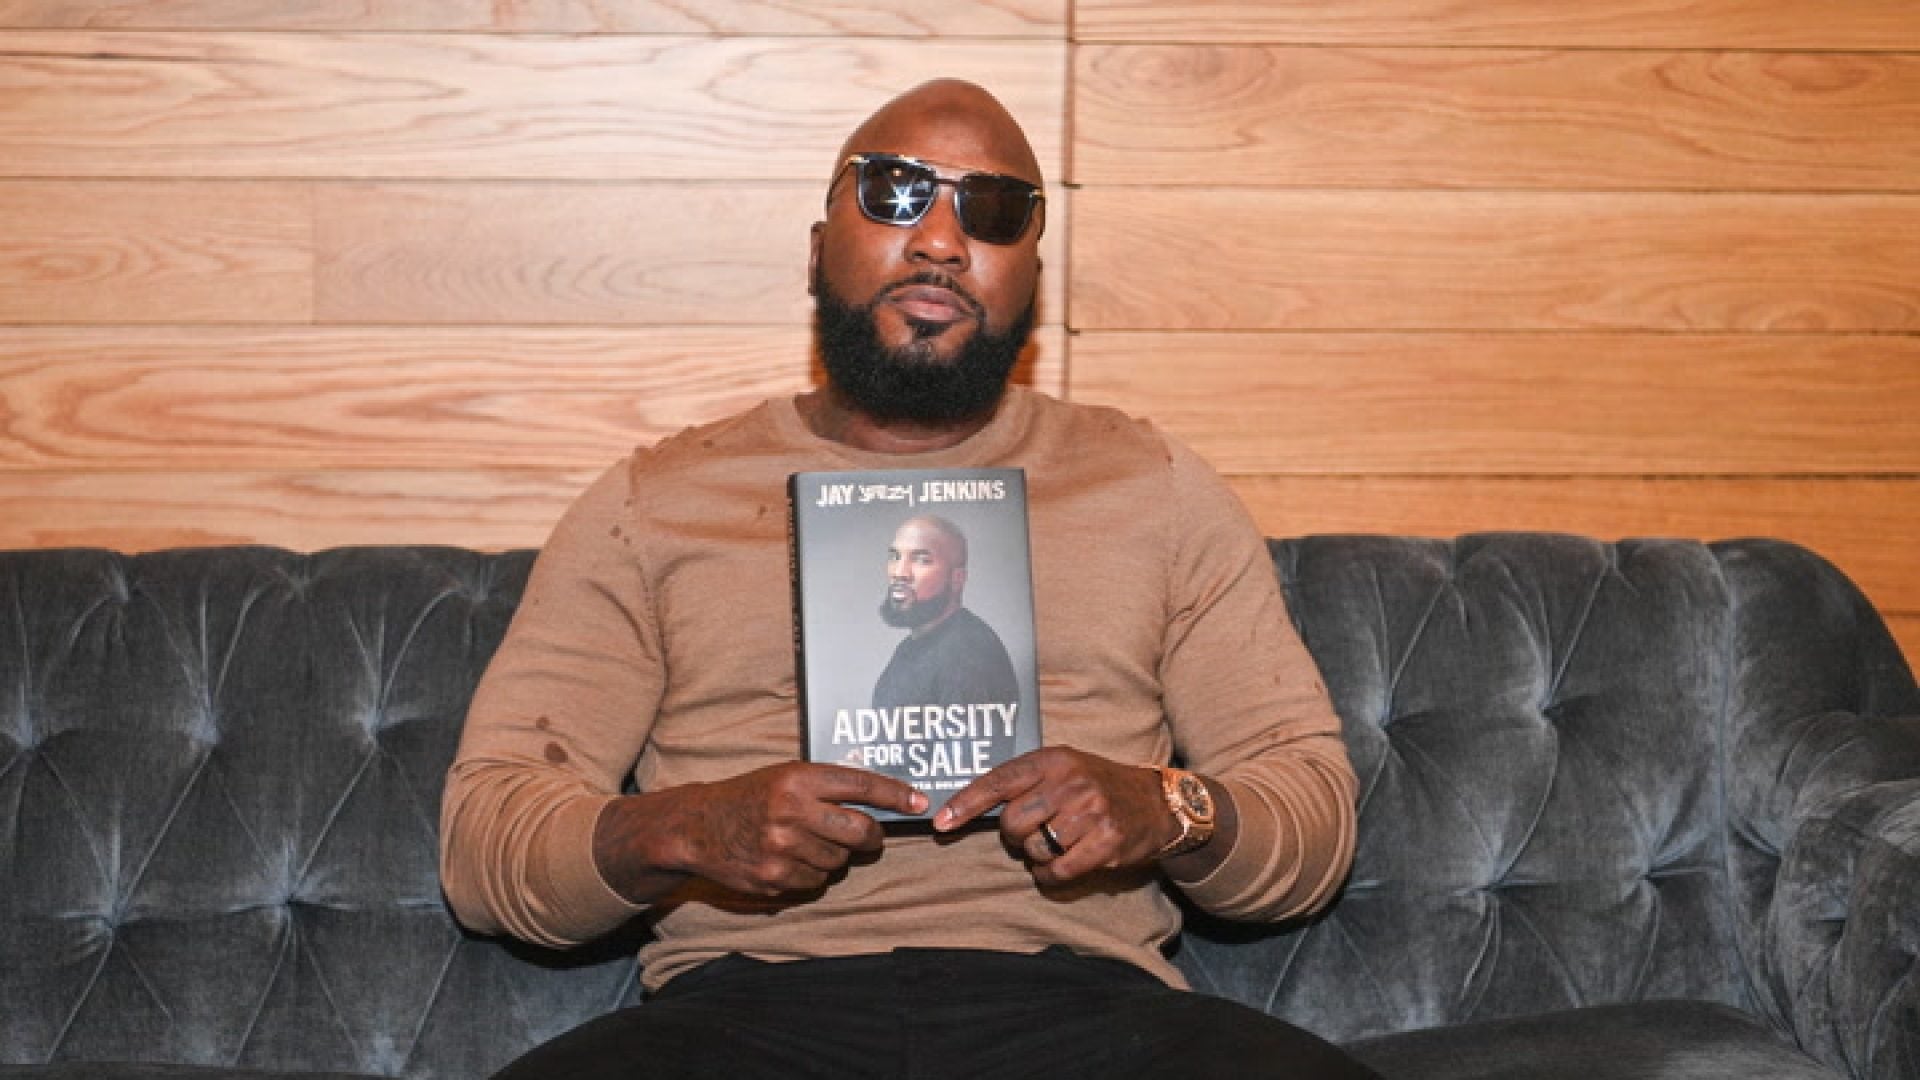 Exclusive: Jay “Jeezy” Jenkins Talks Healing, Overcoming Trauma and How He Found His Purpose in Sharing His Journey